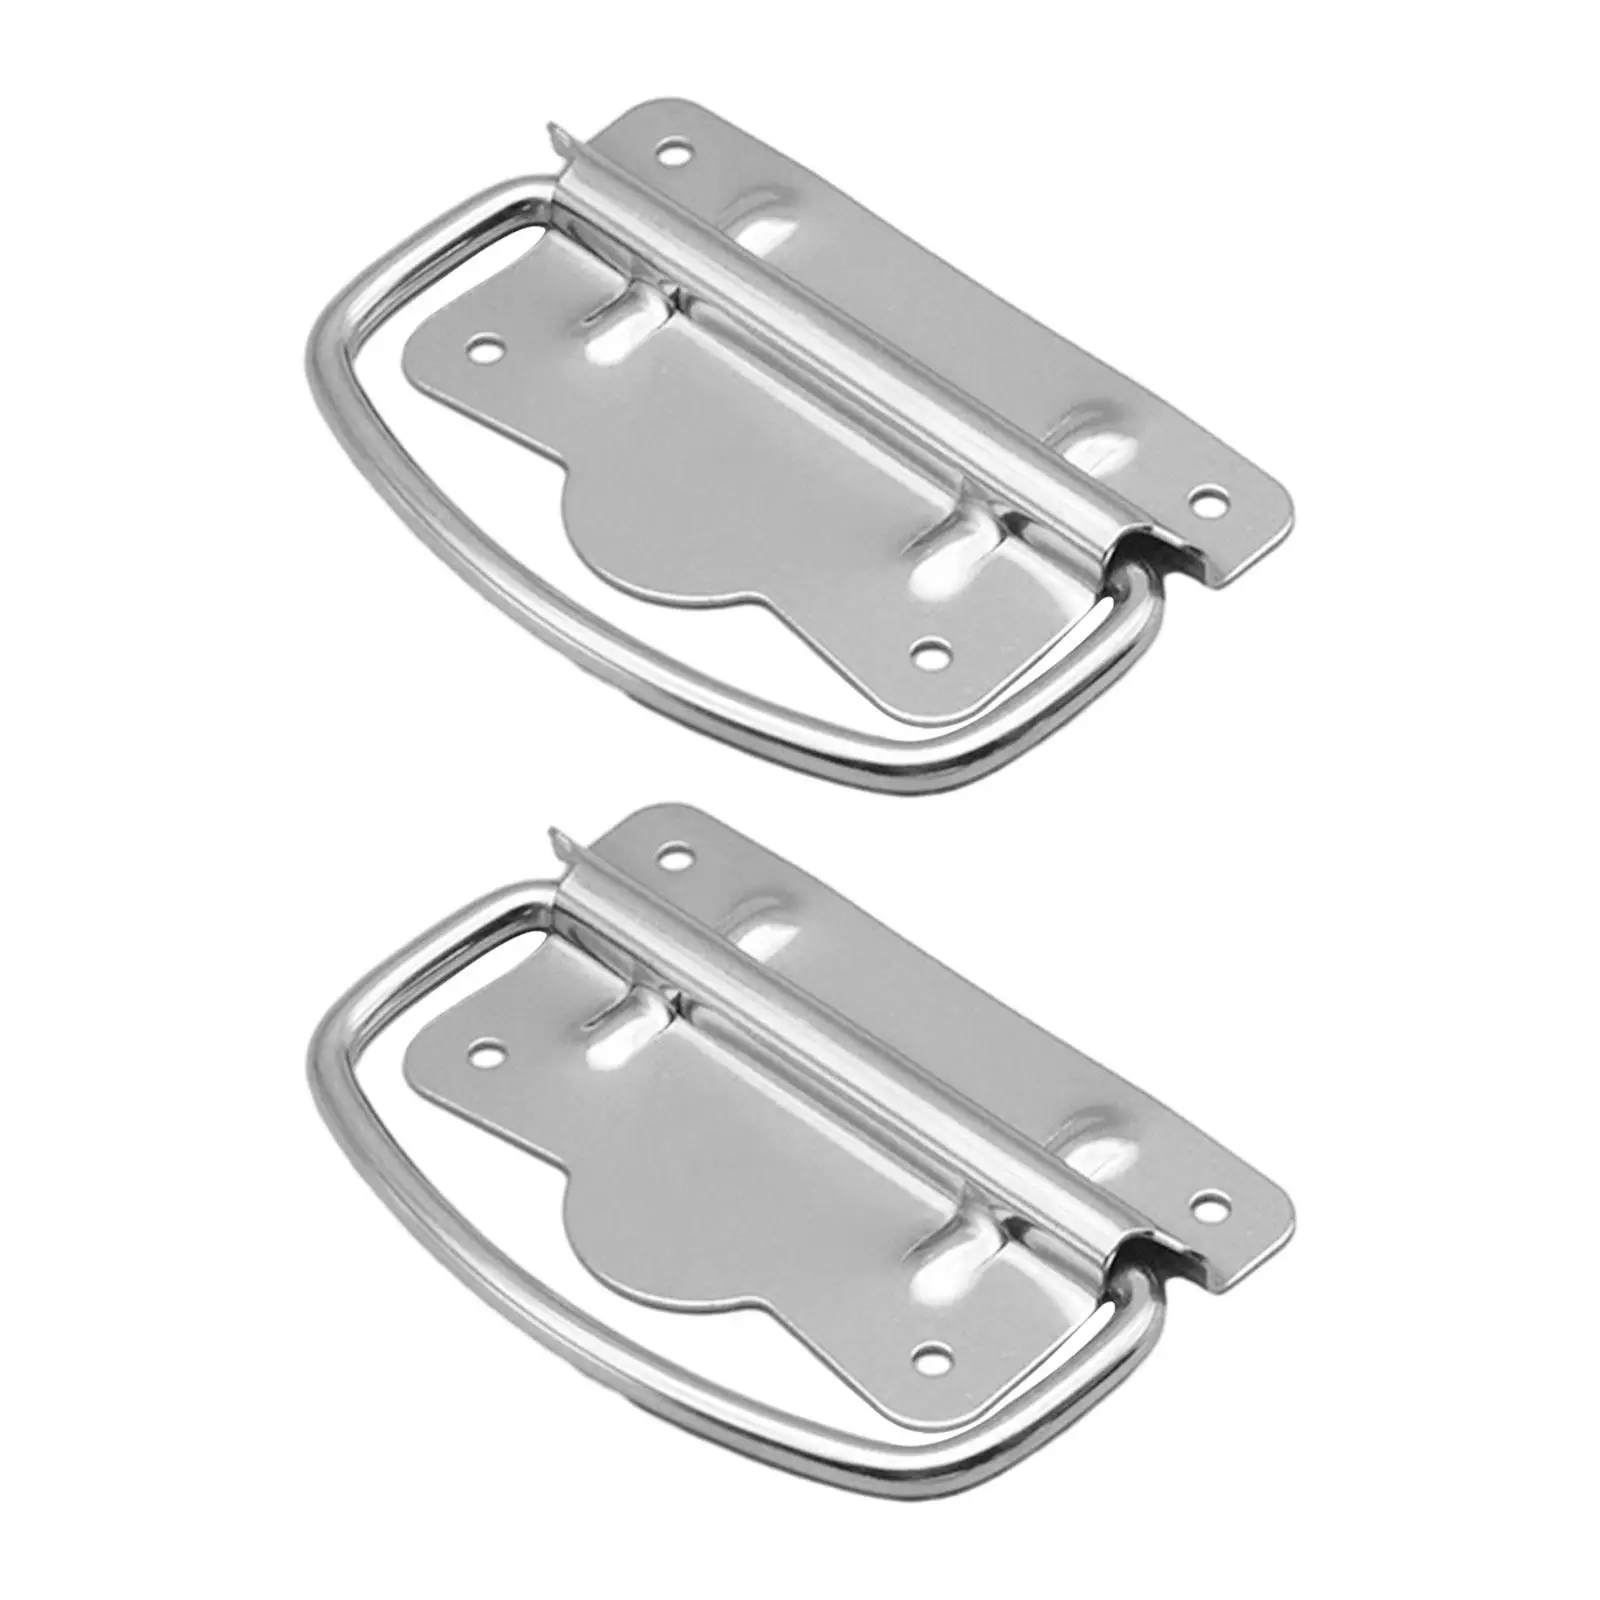 2 Pieces Stainless Steel Folding Pull Handles Stainless Steel Boat Handle for Lifting Door Chest Wooden Box Furniture Wardrobe